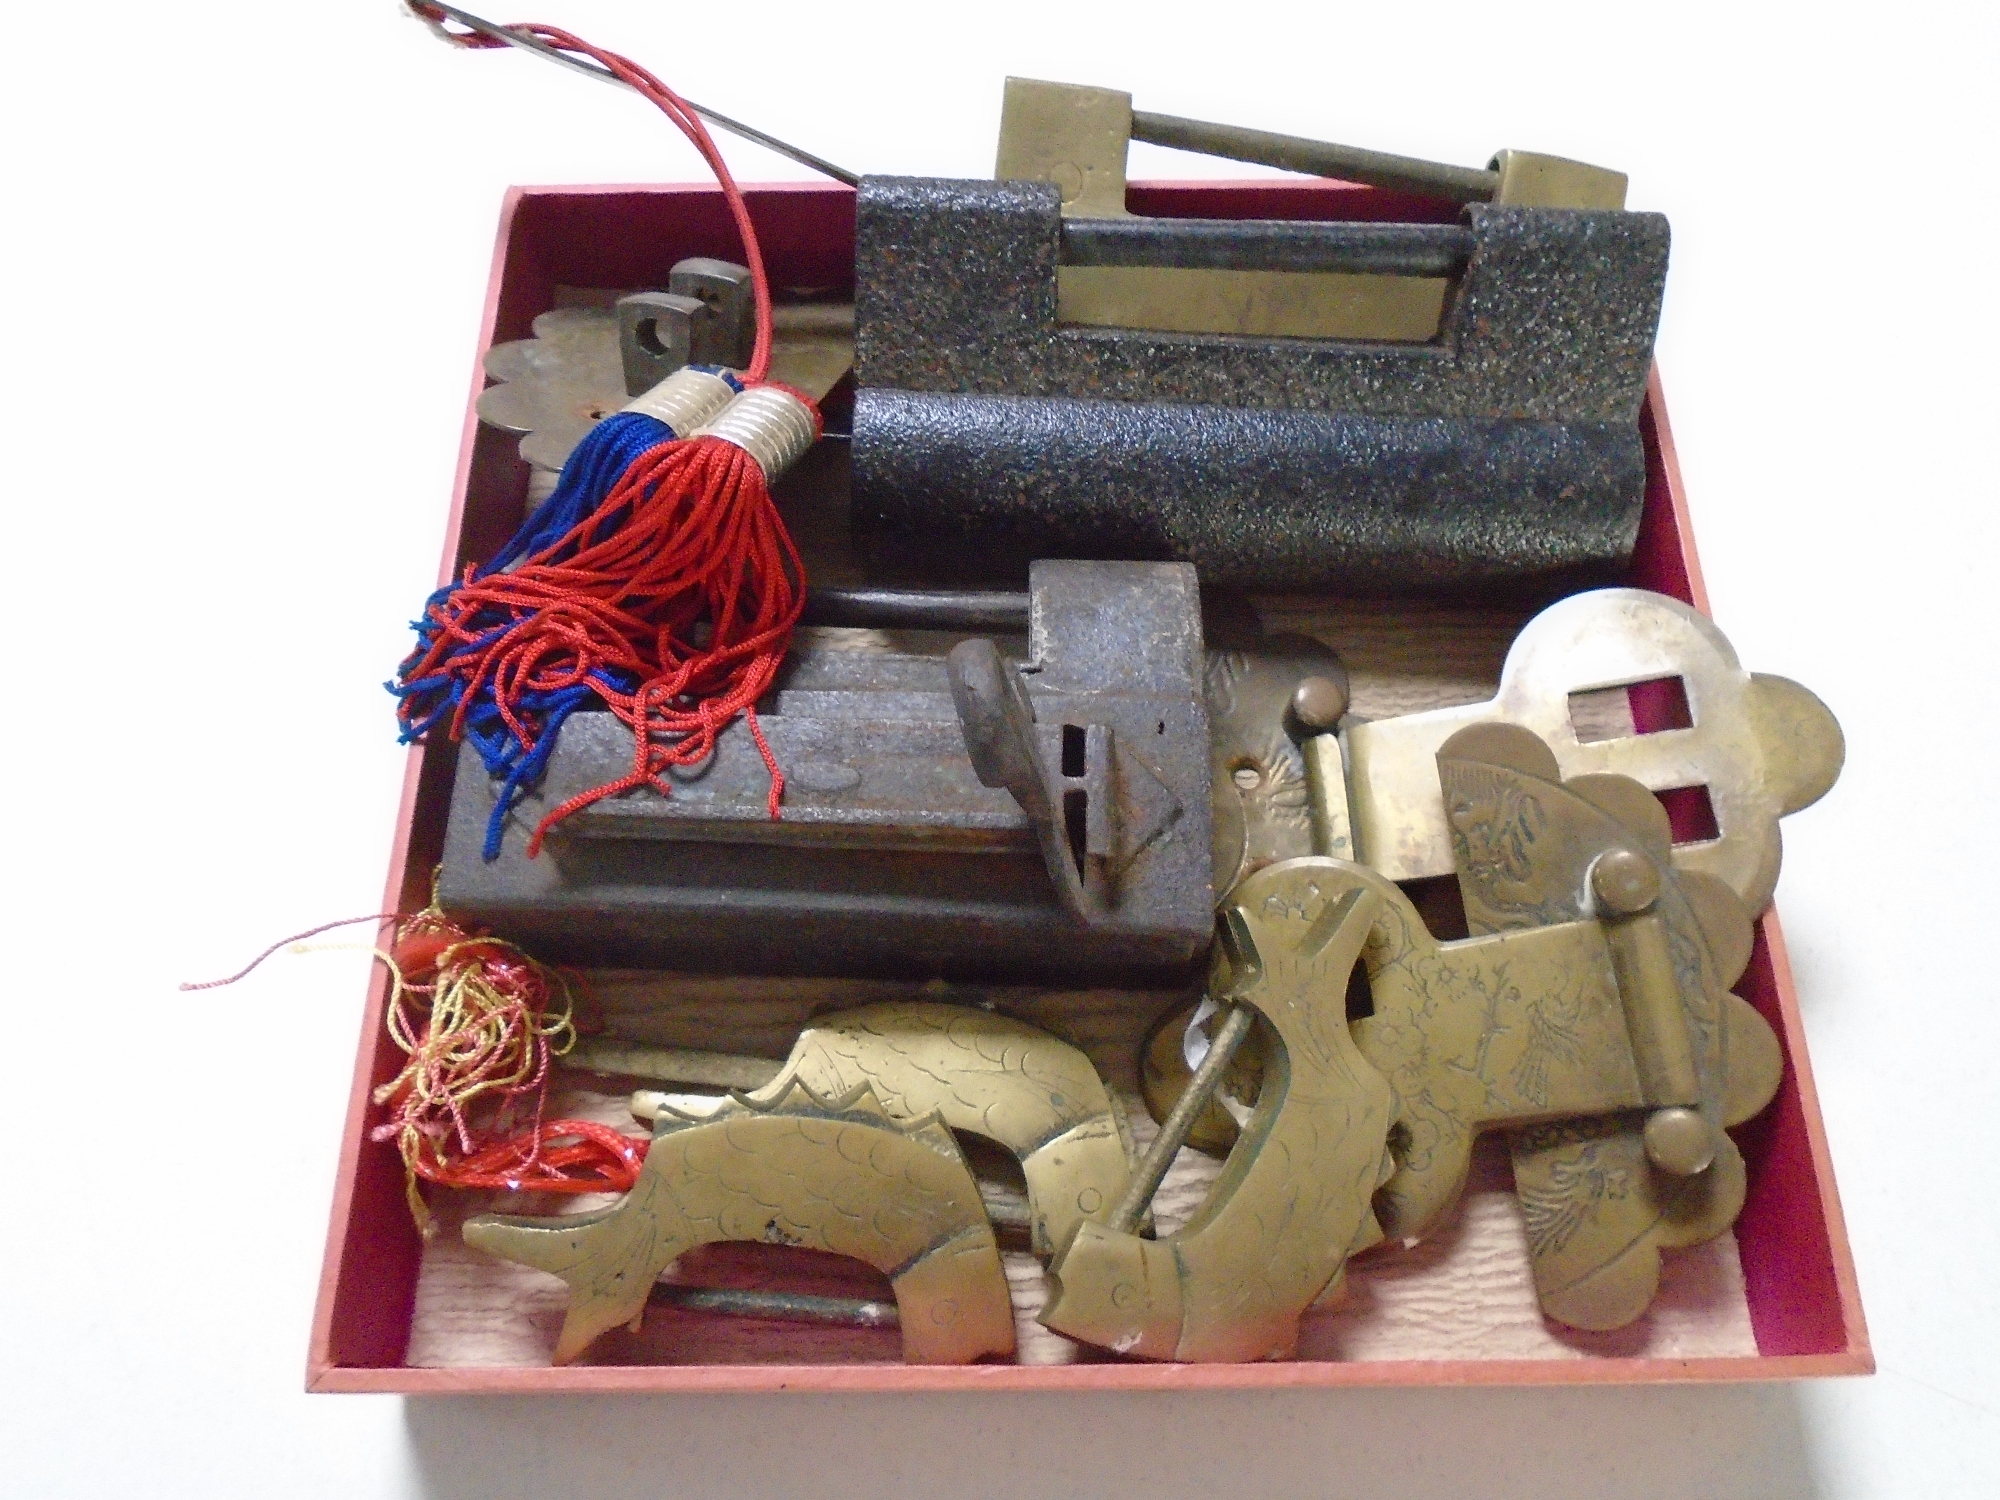 A box containing a quantity of Chinese brass and cast iron locks and hasps.